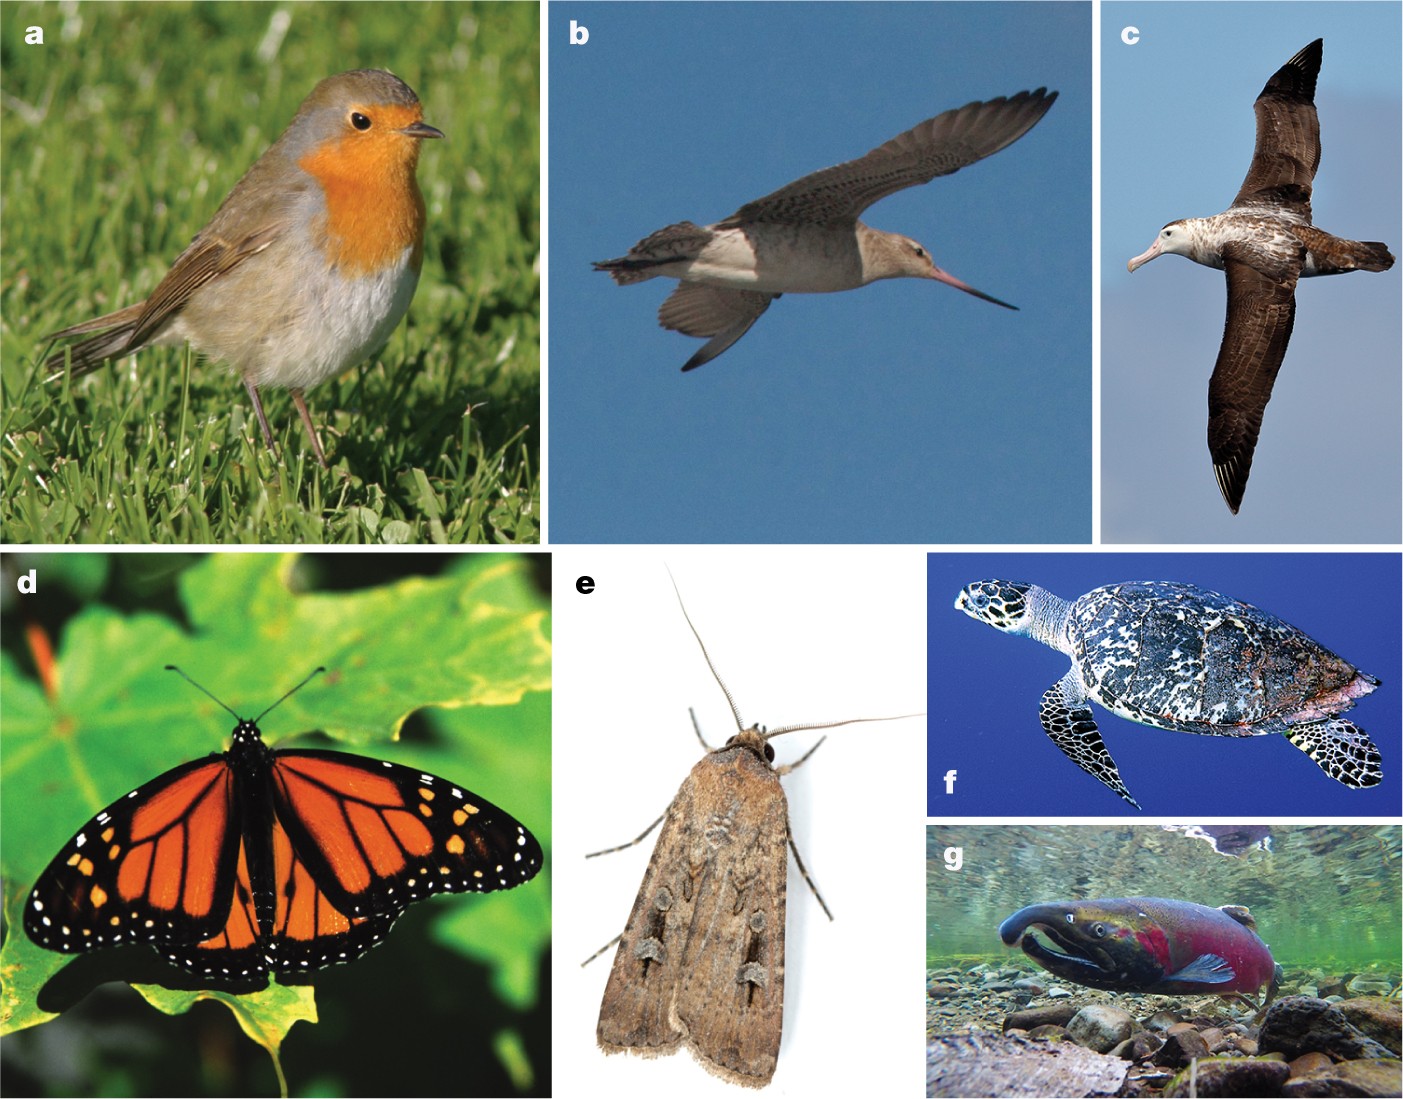 Long-distance navigation and magnetoreception in migratory animals | Nature